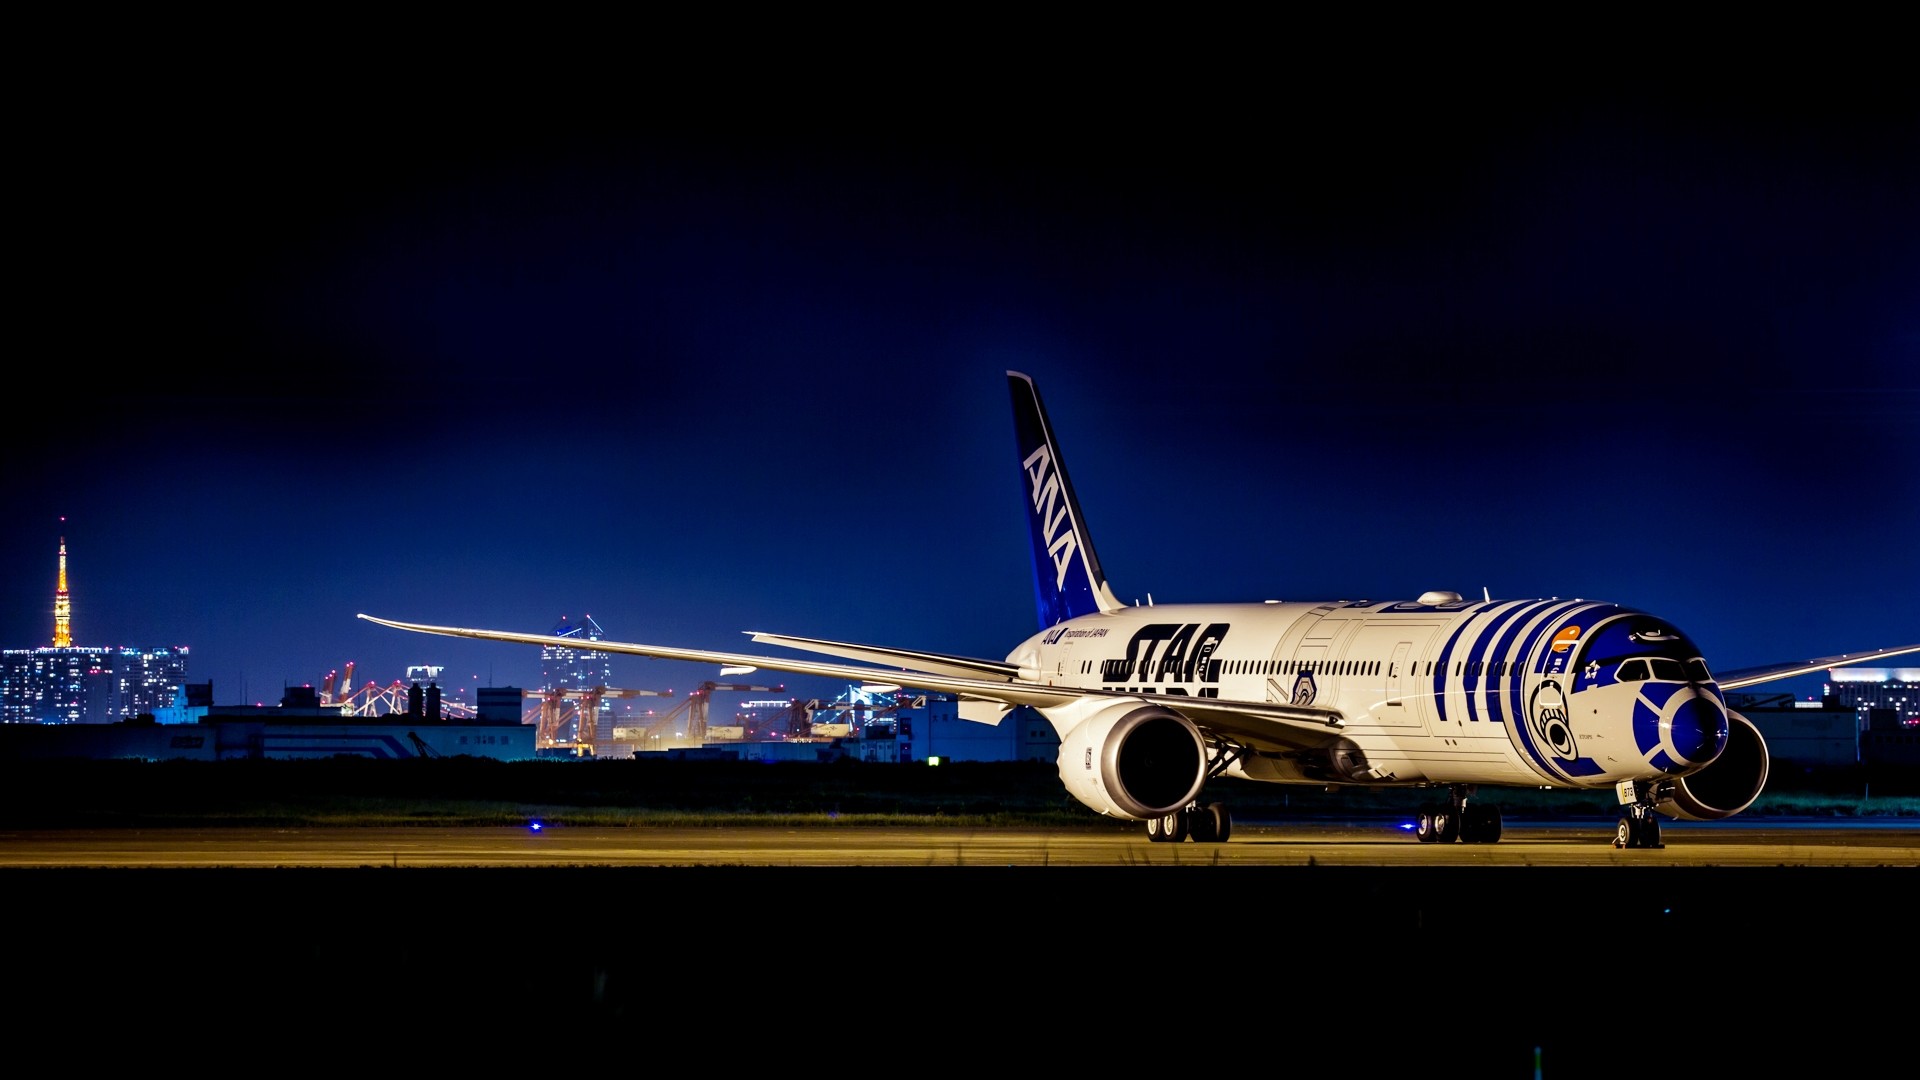 General 1920x1080 airplane Boeing photography Boeing 787 Star Wars R2-D2 airline livery night All Nippon Airways